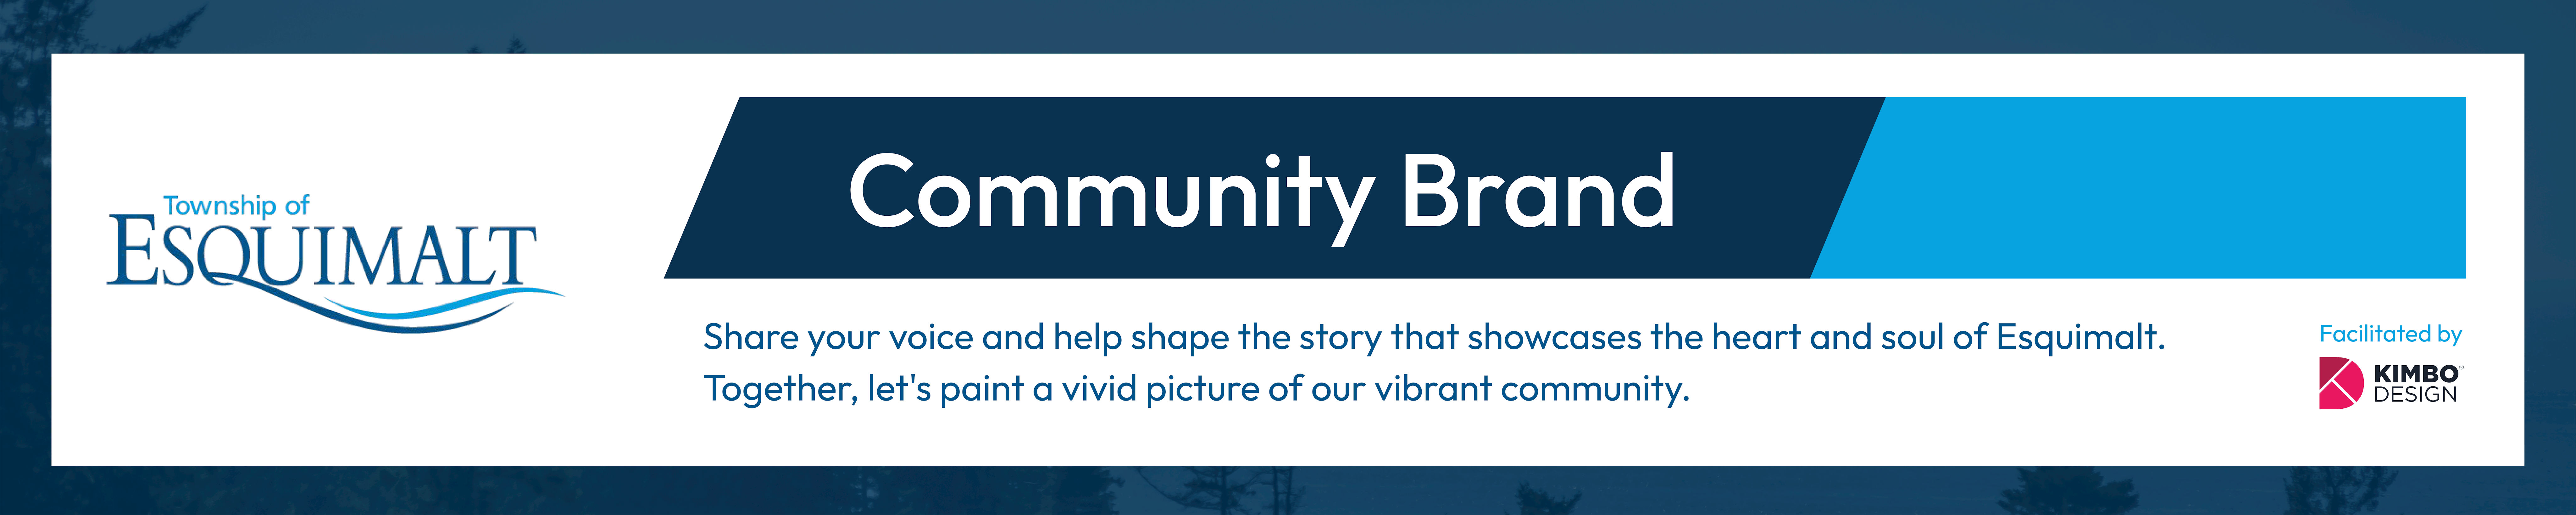 Text: community brand- share your voice and help shape the story that showcases the heart and soul of Esquimalt.